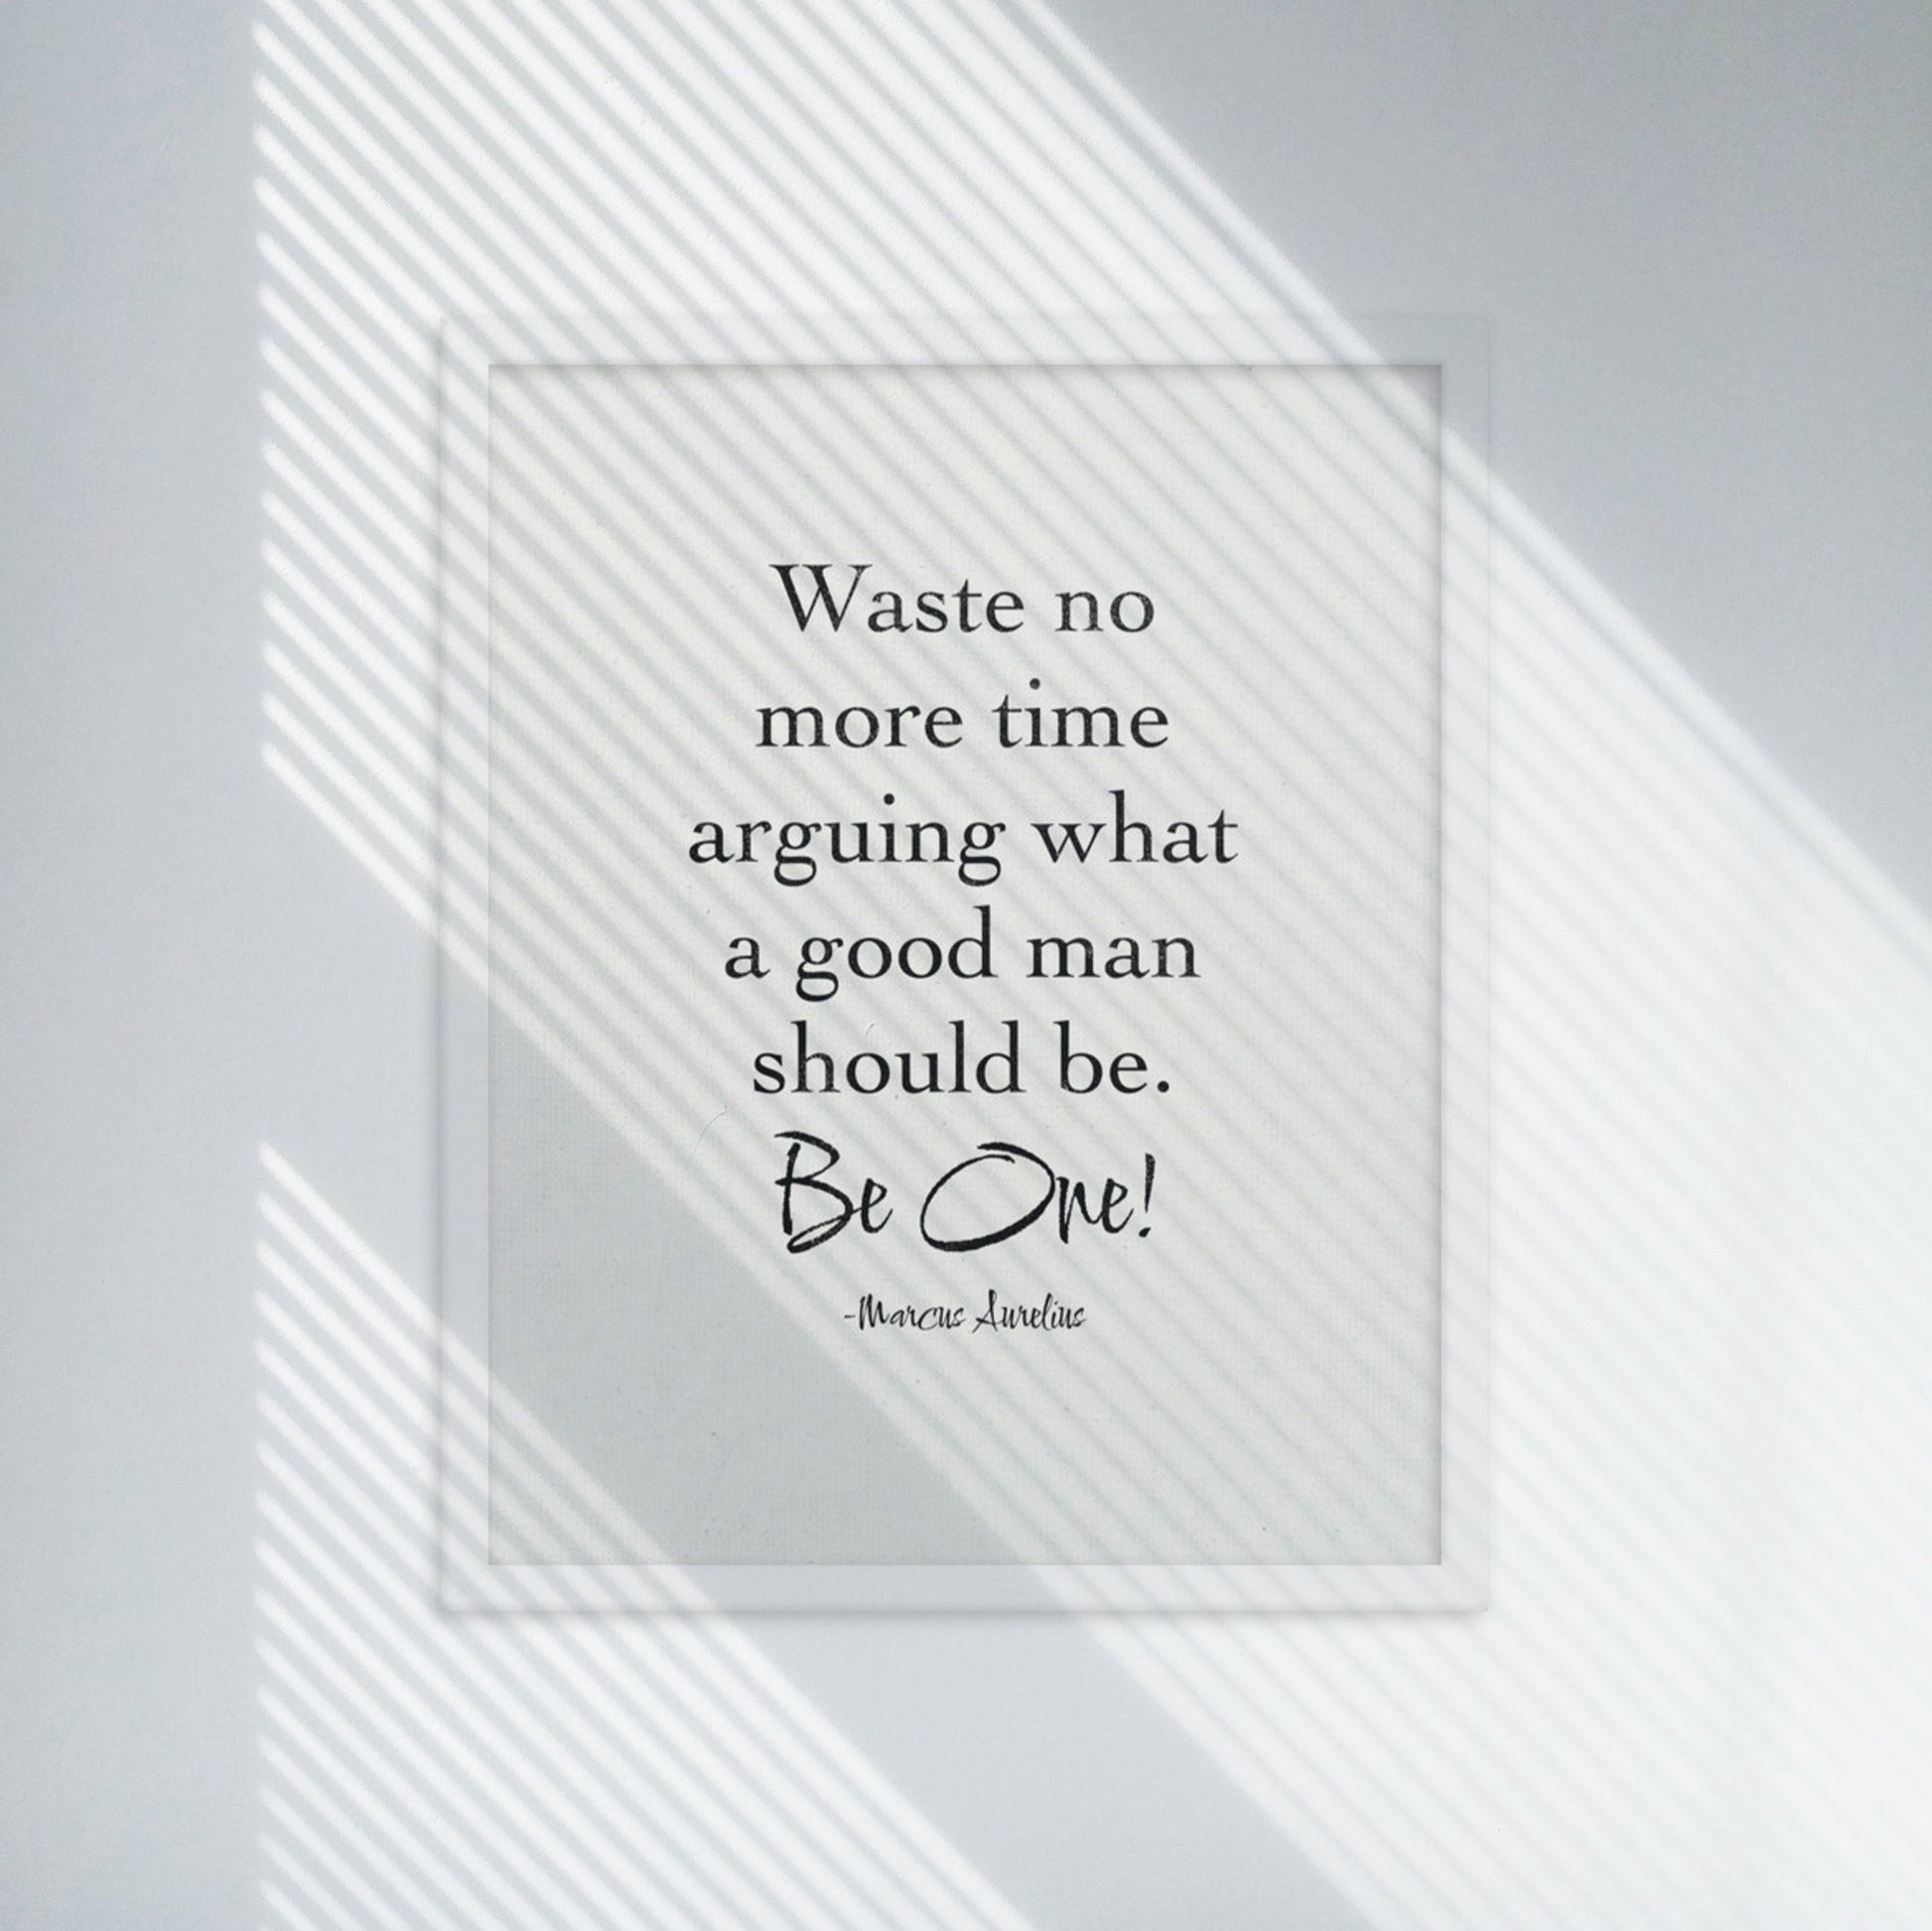 Waste no more time arguing what a good man should be. Be One! by marcus aurelius quote black on white poster in white frame.